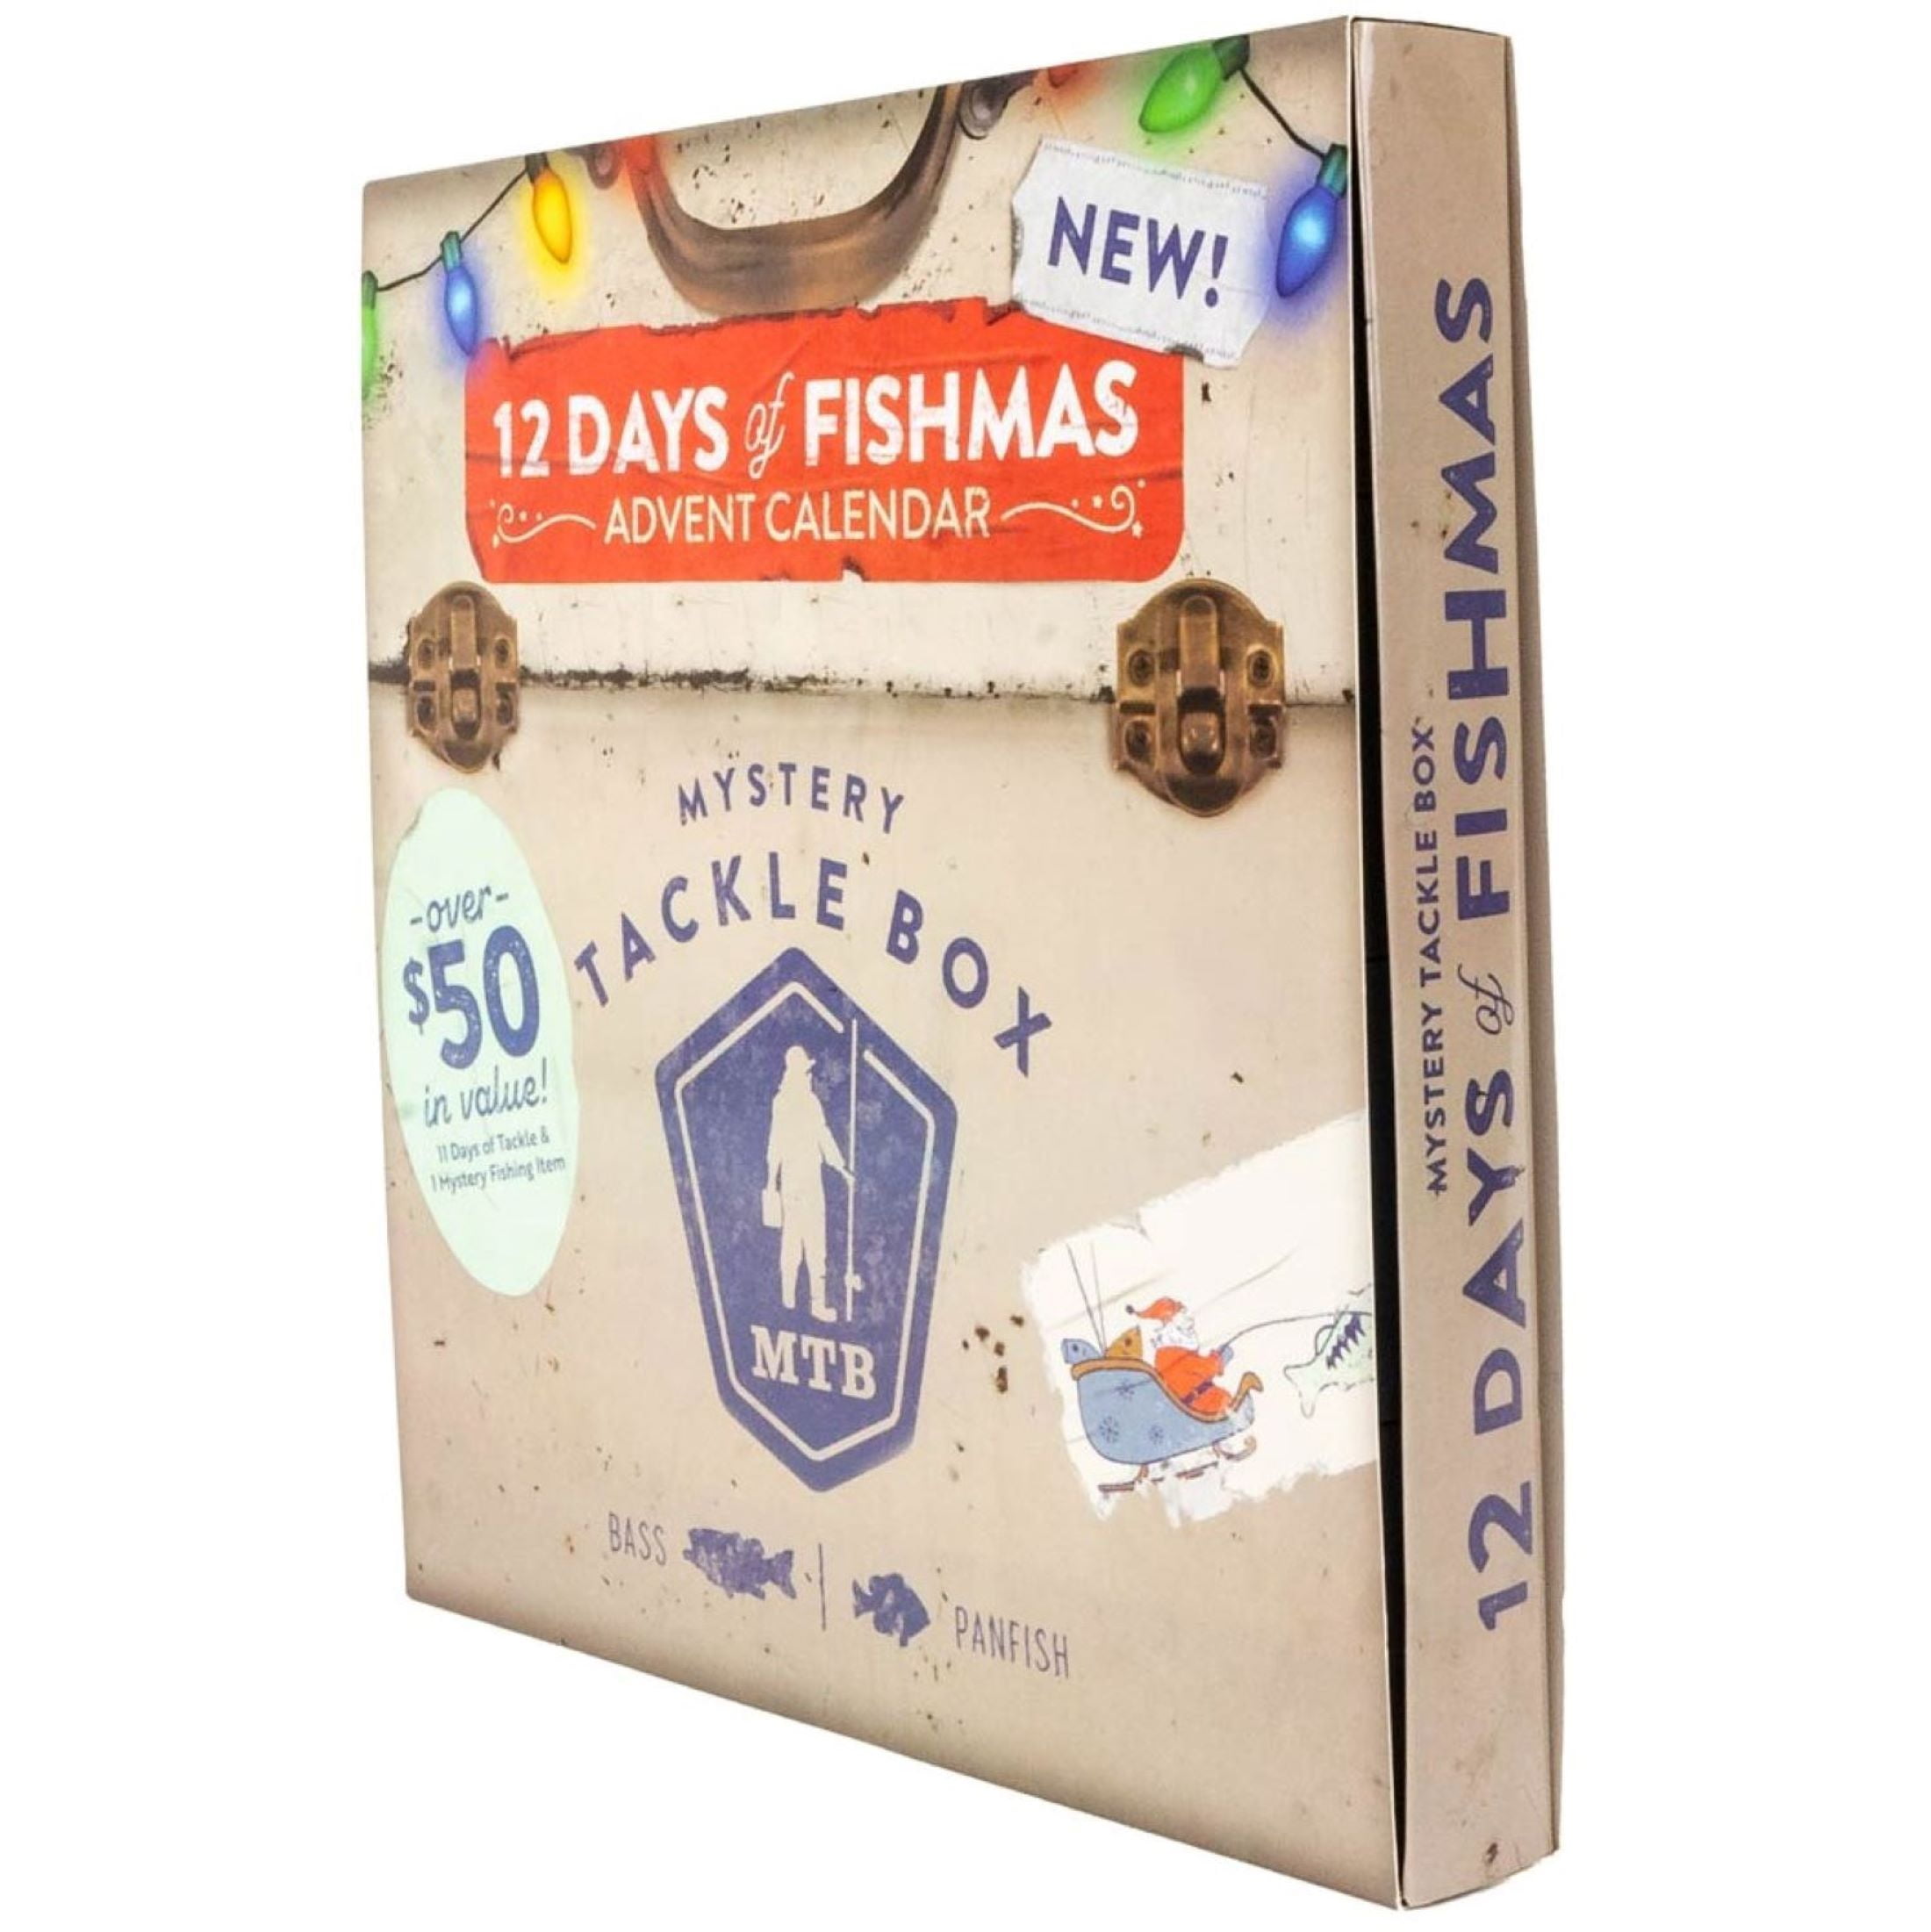  Mystery Tackle Box 12 Days of Fishmas Advent Calendar 2022 :  Home & Kitchen